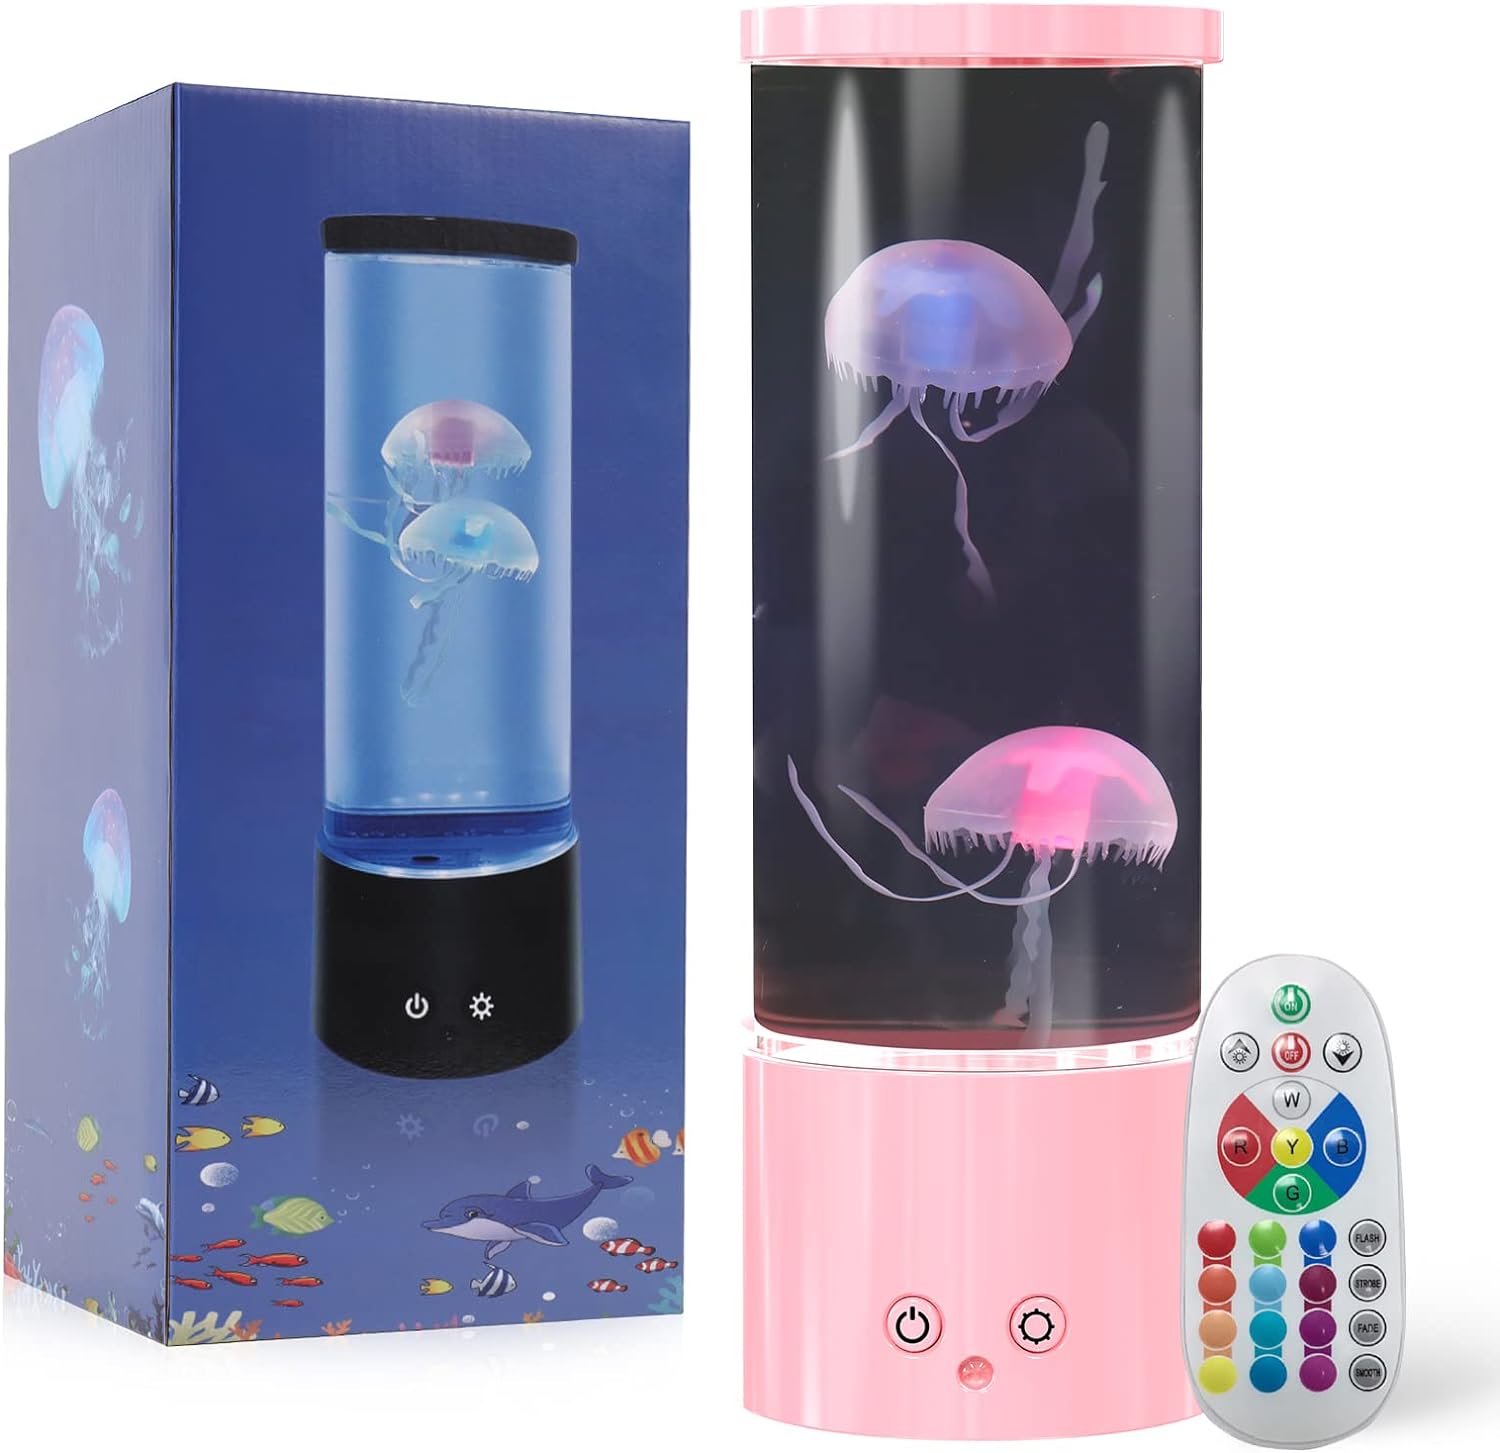 Jellyfish Lamp, LED Jellyfish Tank Table Lamp with Remote Control,17 Color Changing Dimmable Jellyfish Night Light for Home Decor & Christmas Birthday Gifts